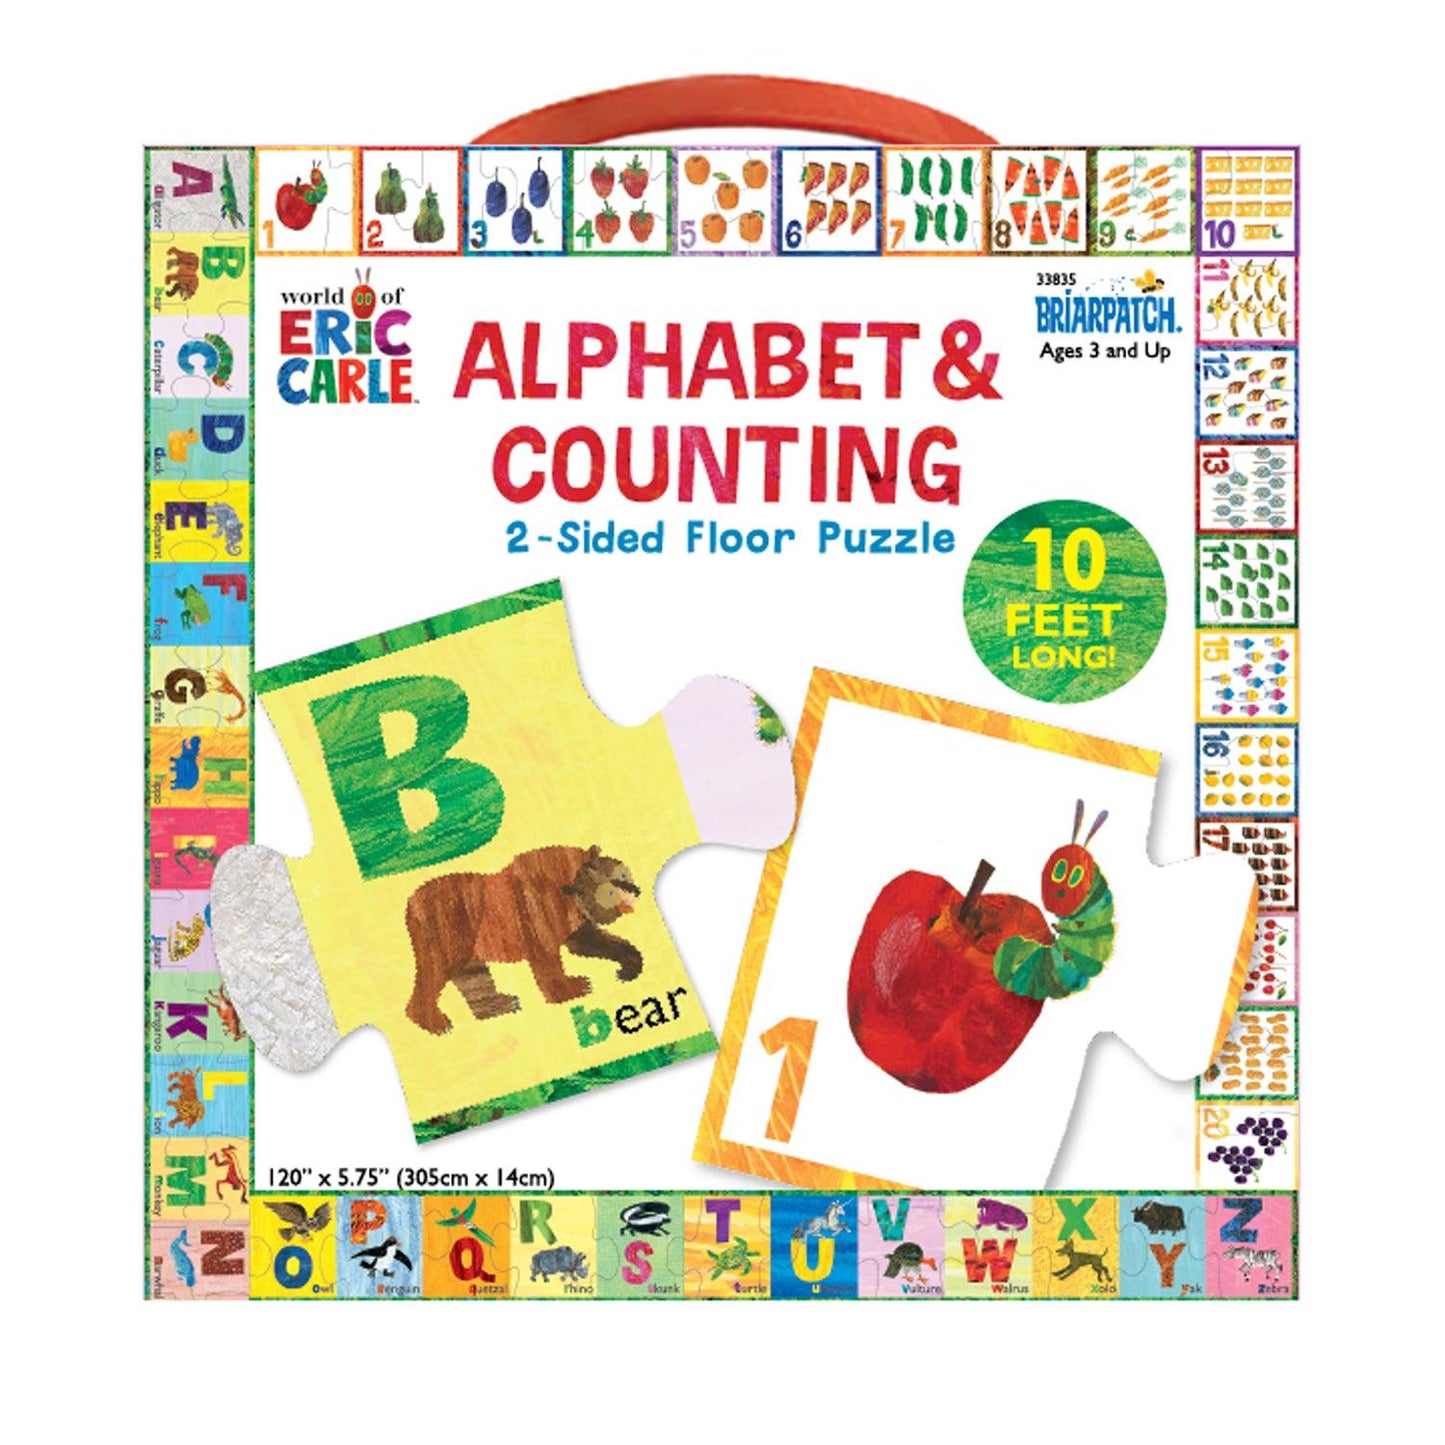 The World of Eric Carle™ Alphabet & Counting 2-Sided Floor Puzzle - Loomini